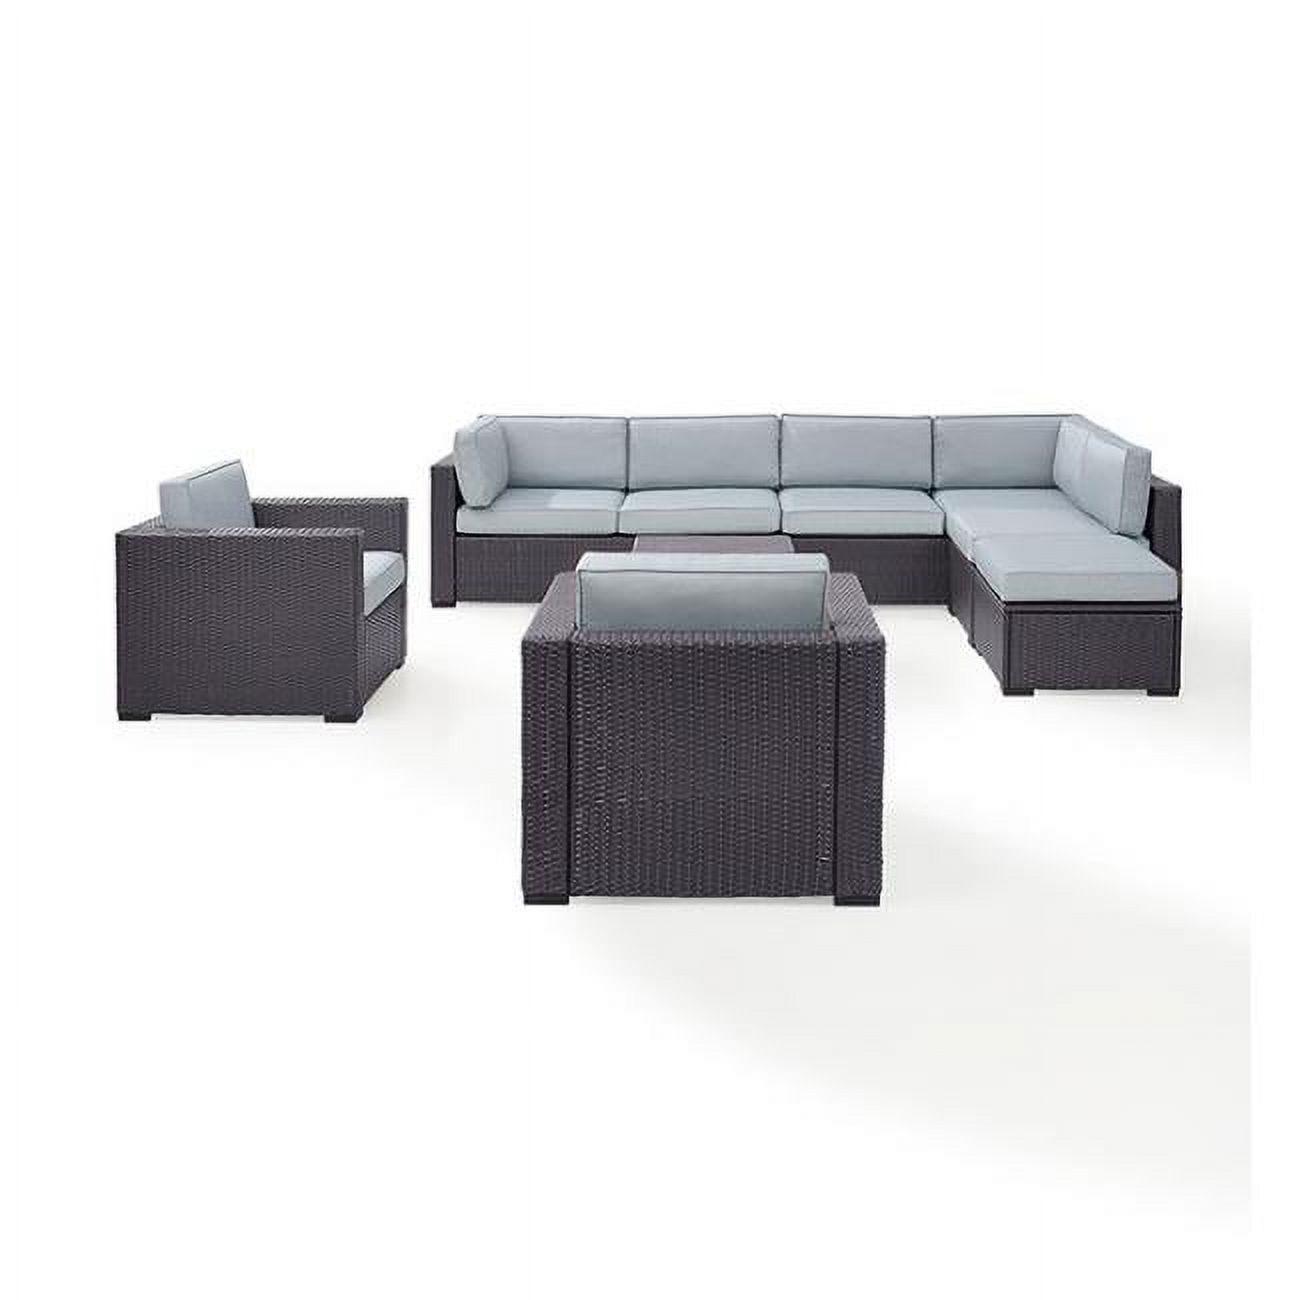 Crosley Furniture Biscayne 7 Piece Metal Patio Sectional Set in Brown/Blue - image 1 of 4